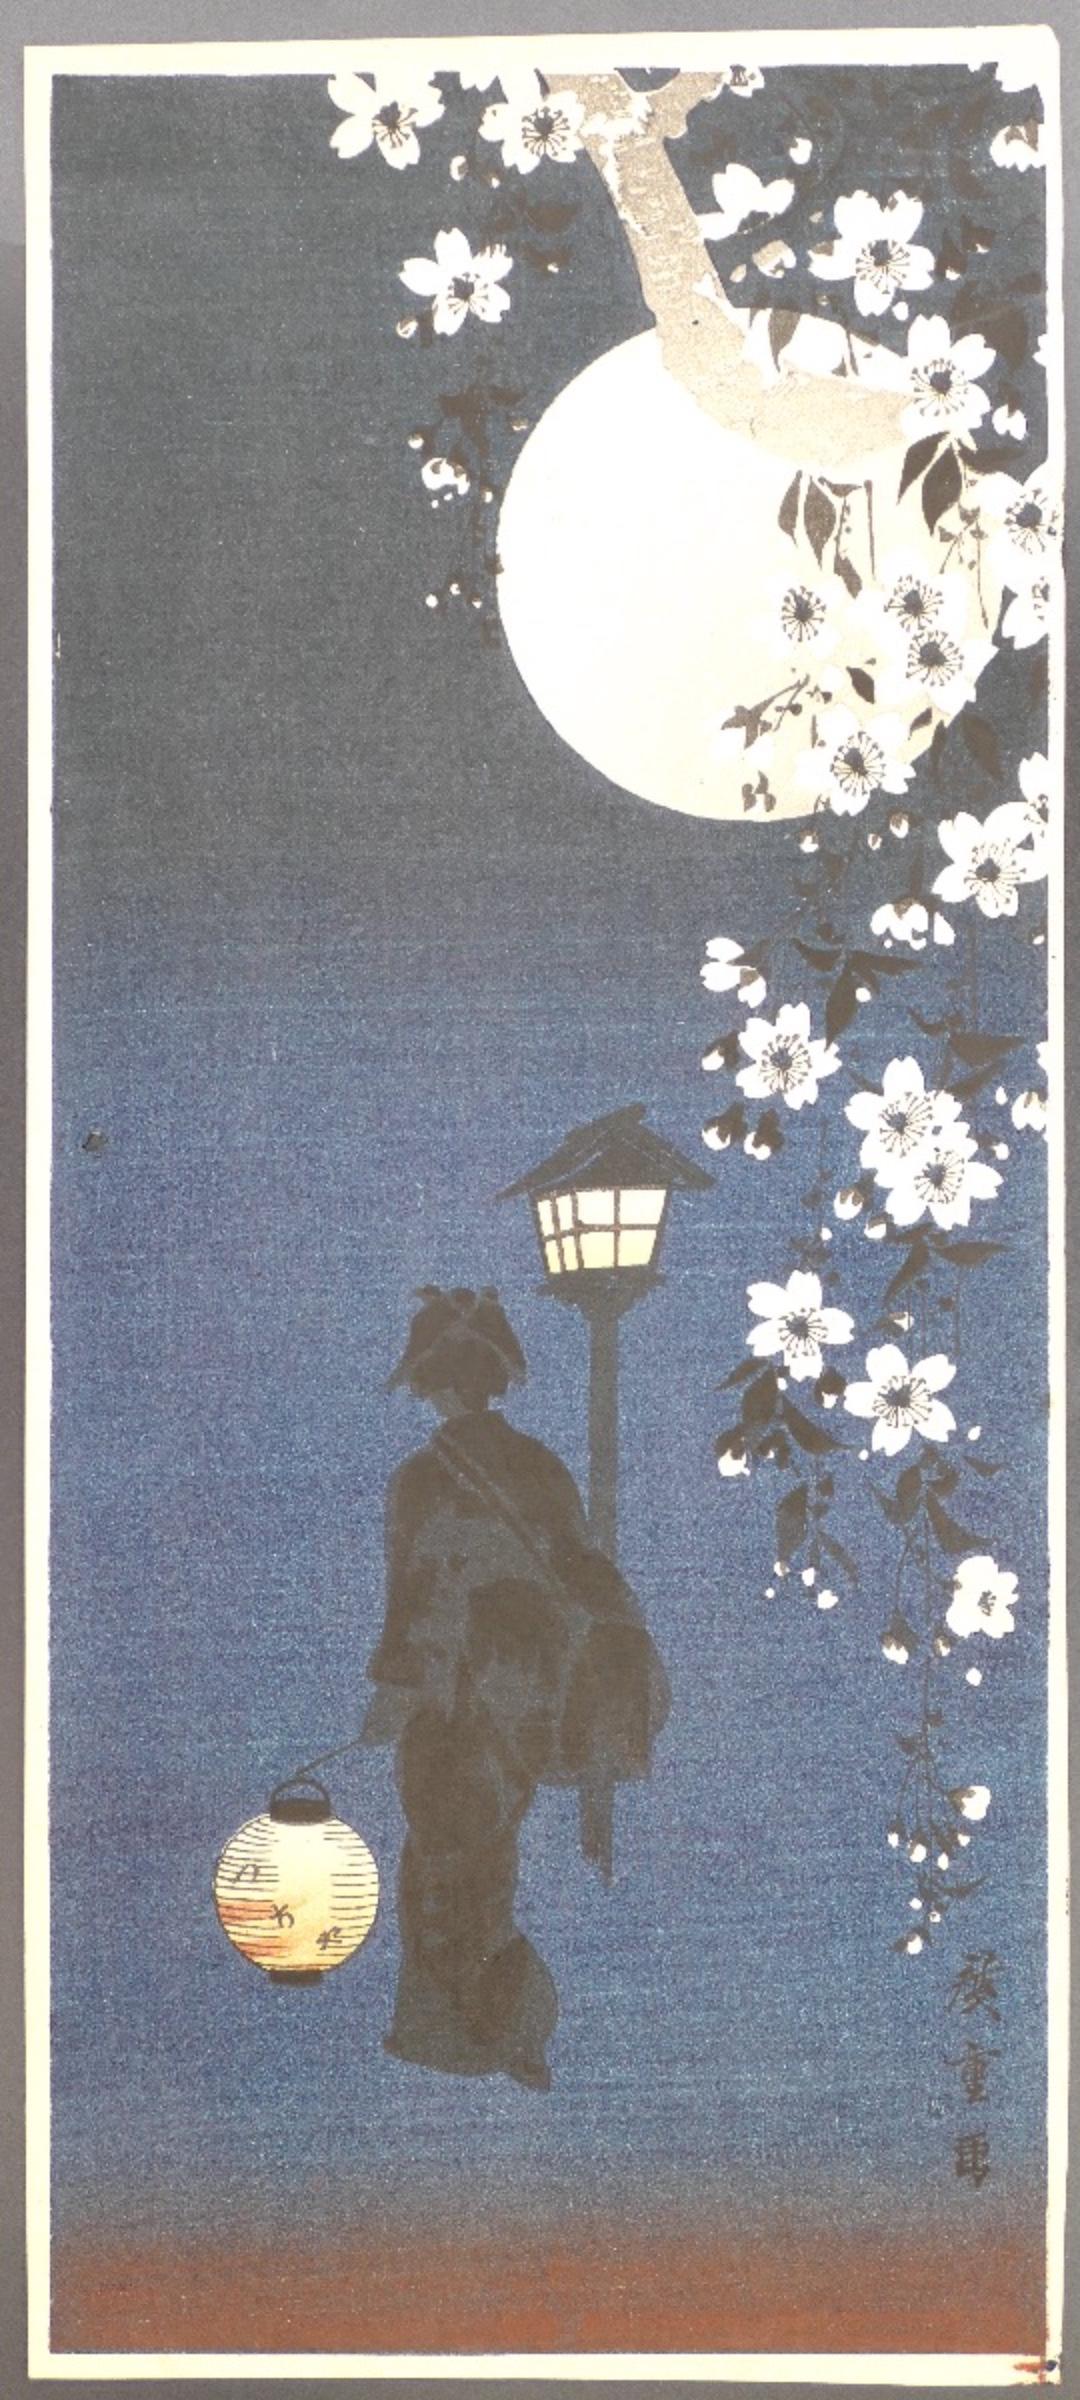 Cherry Blossoms at night is a beautiful colored woodcut print on paper made by the Japanese master Utagawa Hiroshige (1797-1858), and printed in the late 19th Century. Image Dimensions: 37 x 16 cm

Very good condition except for a small hole in the